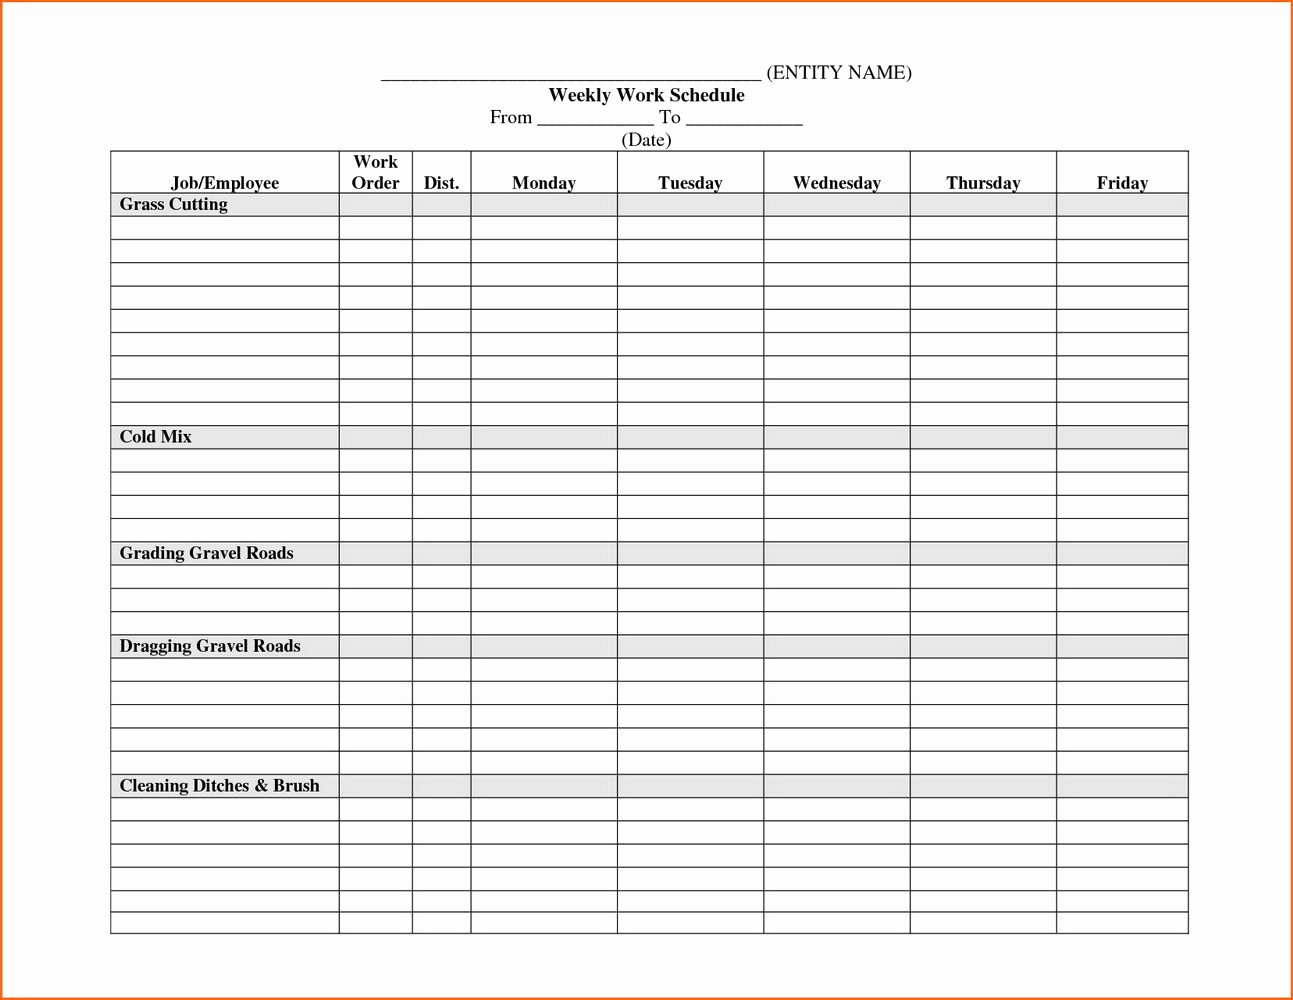 Weekly Staffing Schedule Template Awesome Weekly Employee Schedule Template Free